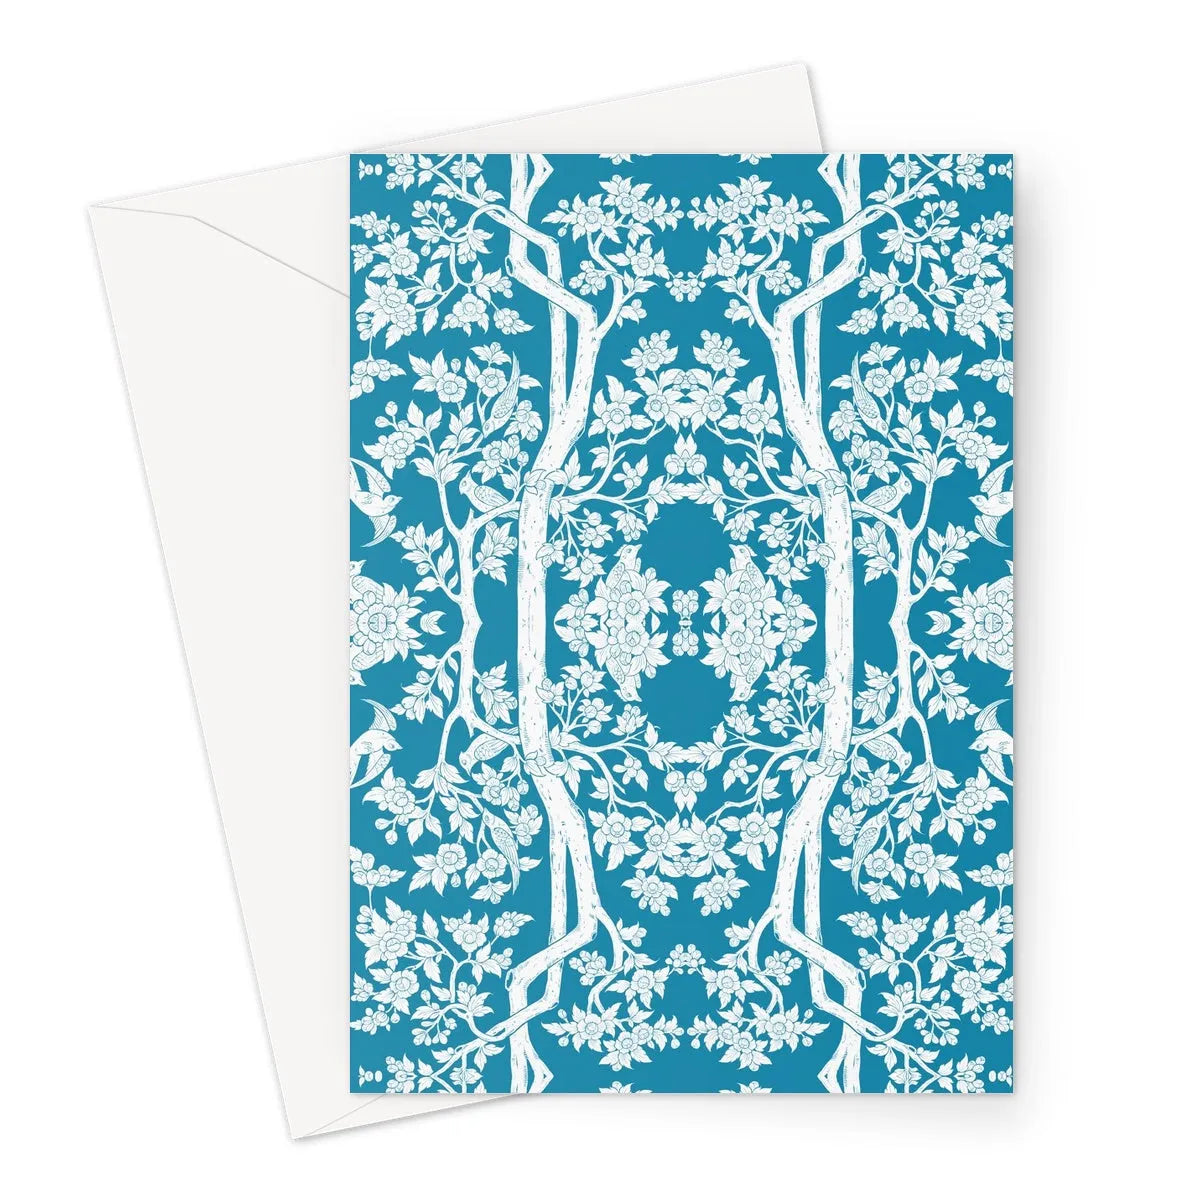 Aviary Blue Greeting Card - A5 Portrait / 1 Card - Greeting & Note Cards - Aesthetic Art